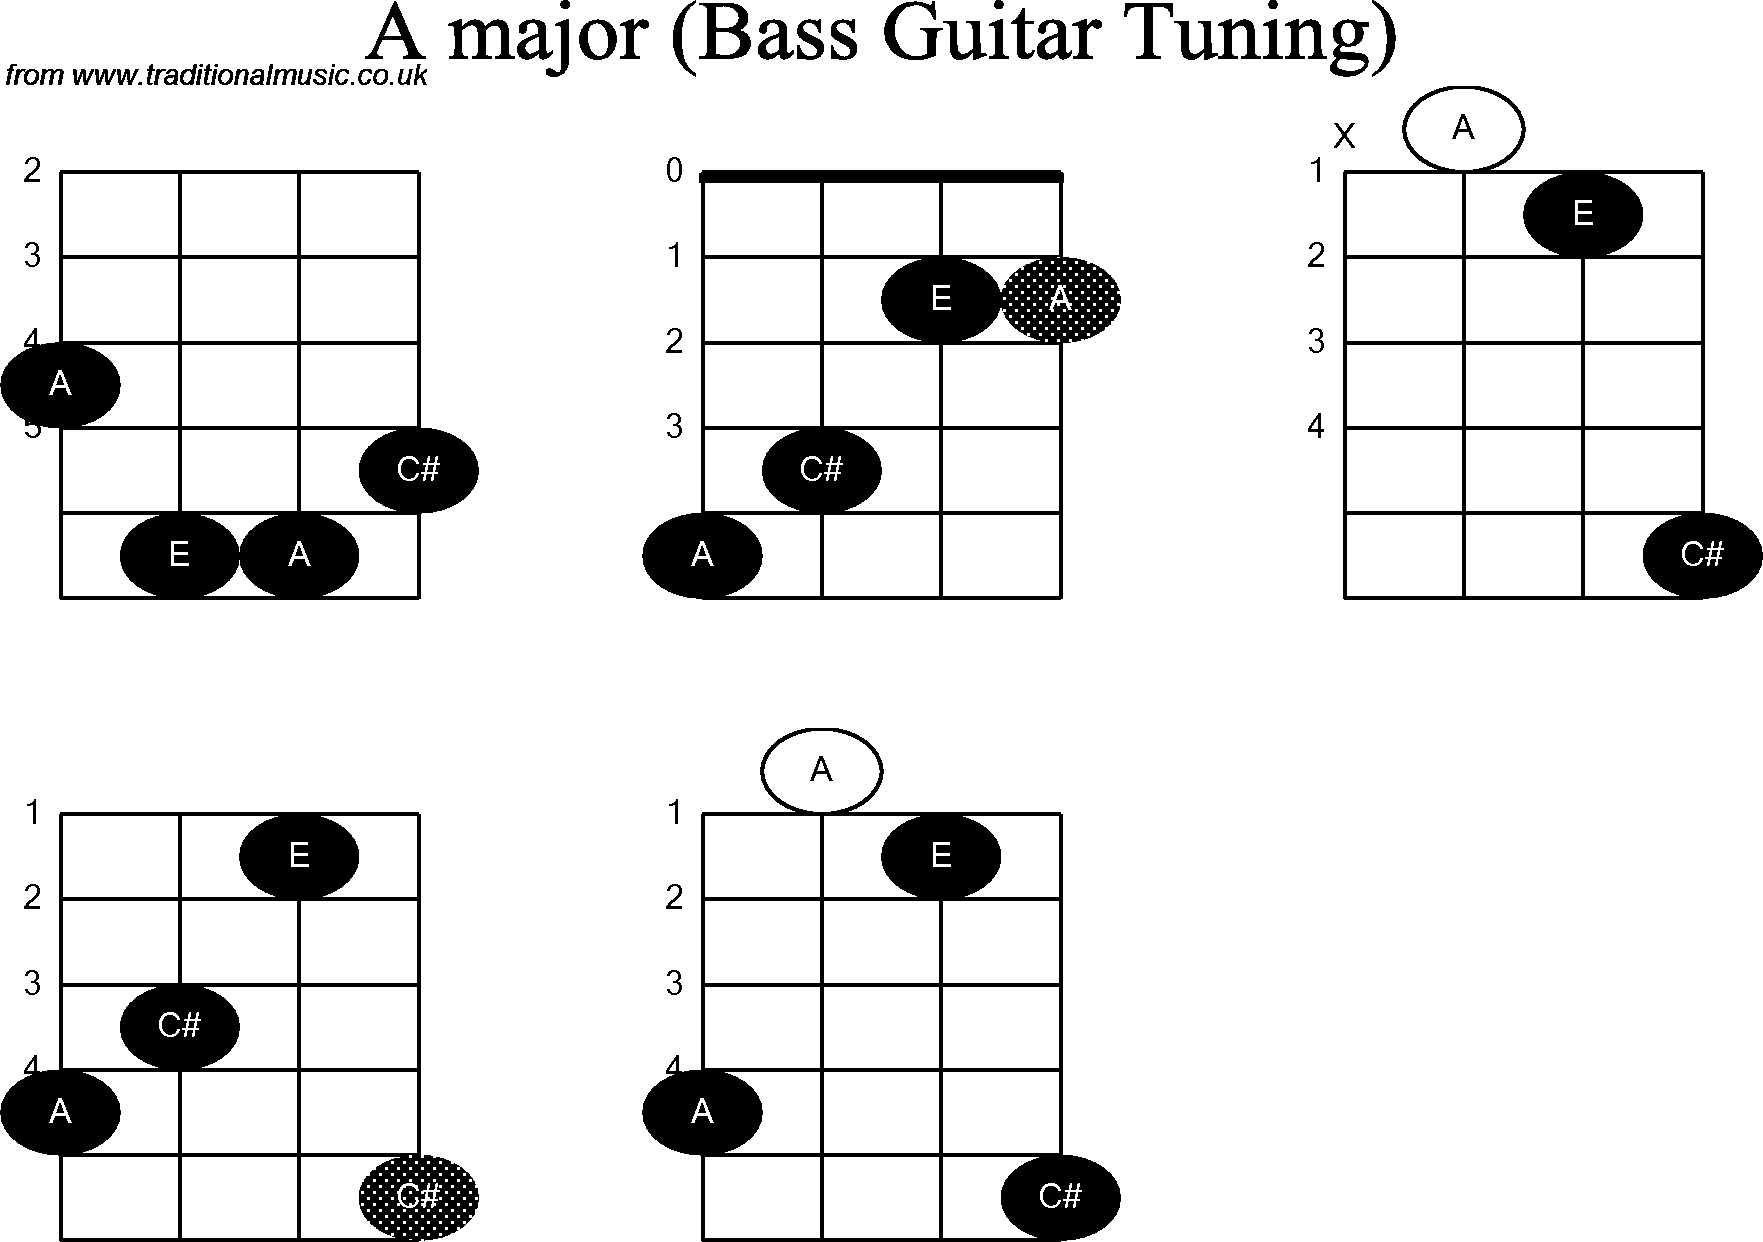 Bass Guitar chord charts for: A